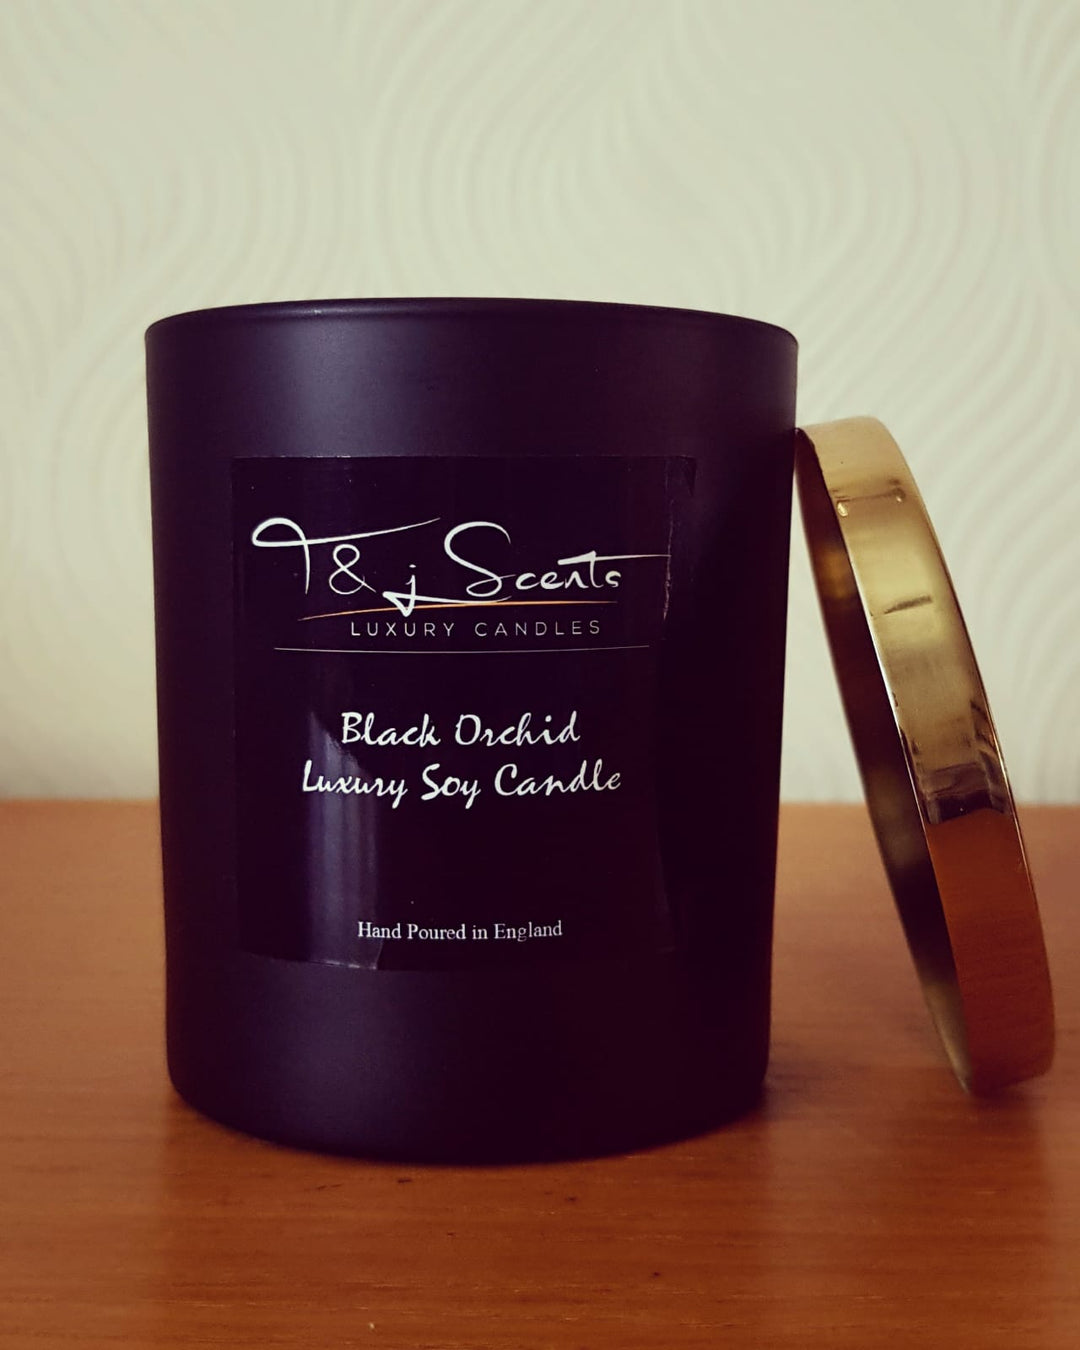 Black Orchid Luxury Soy Candles